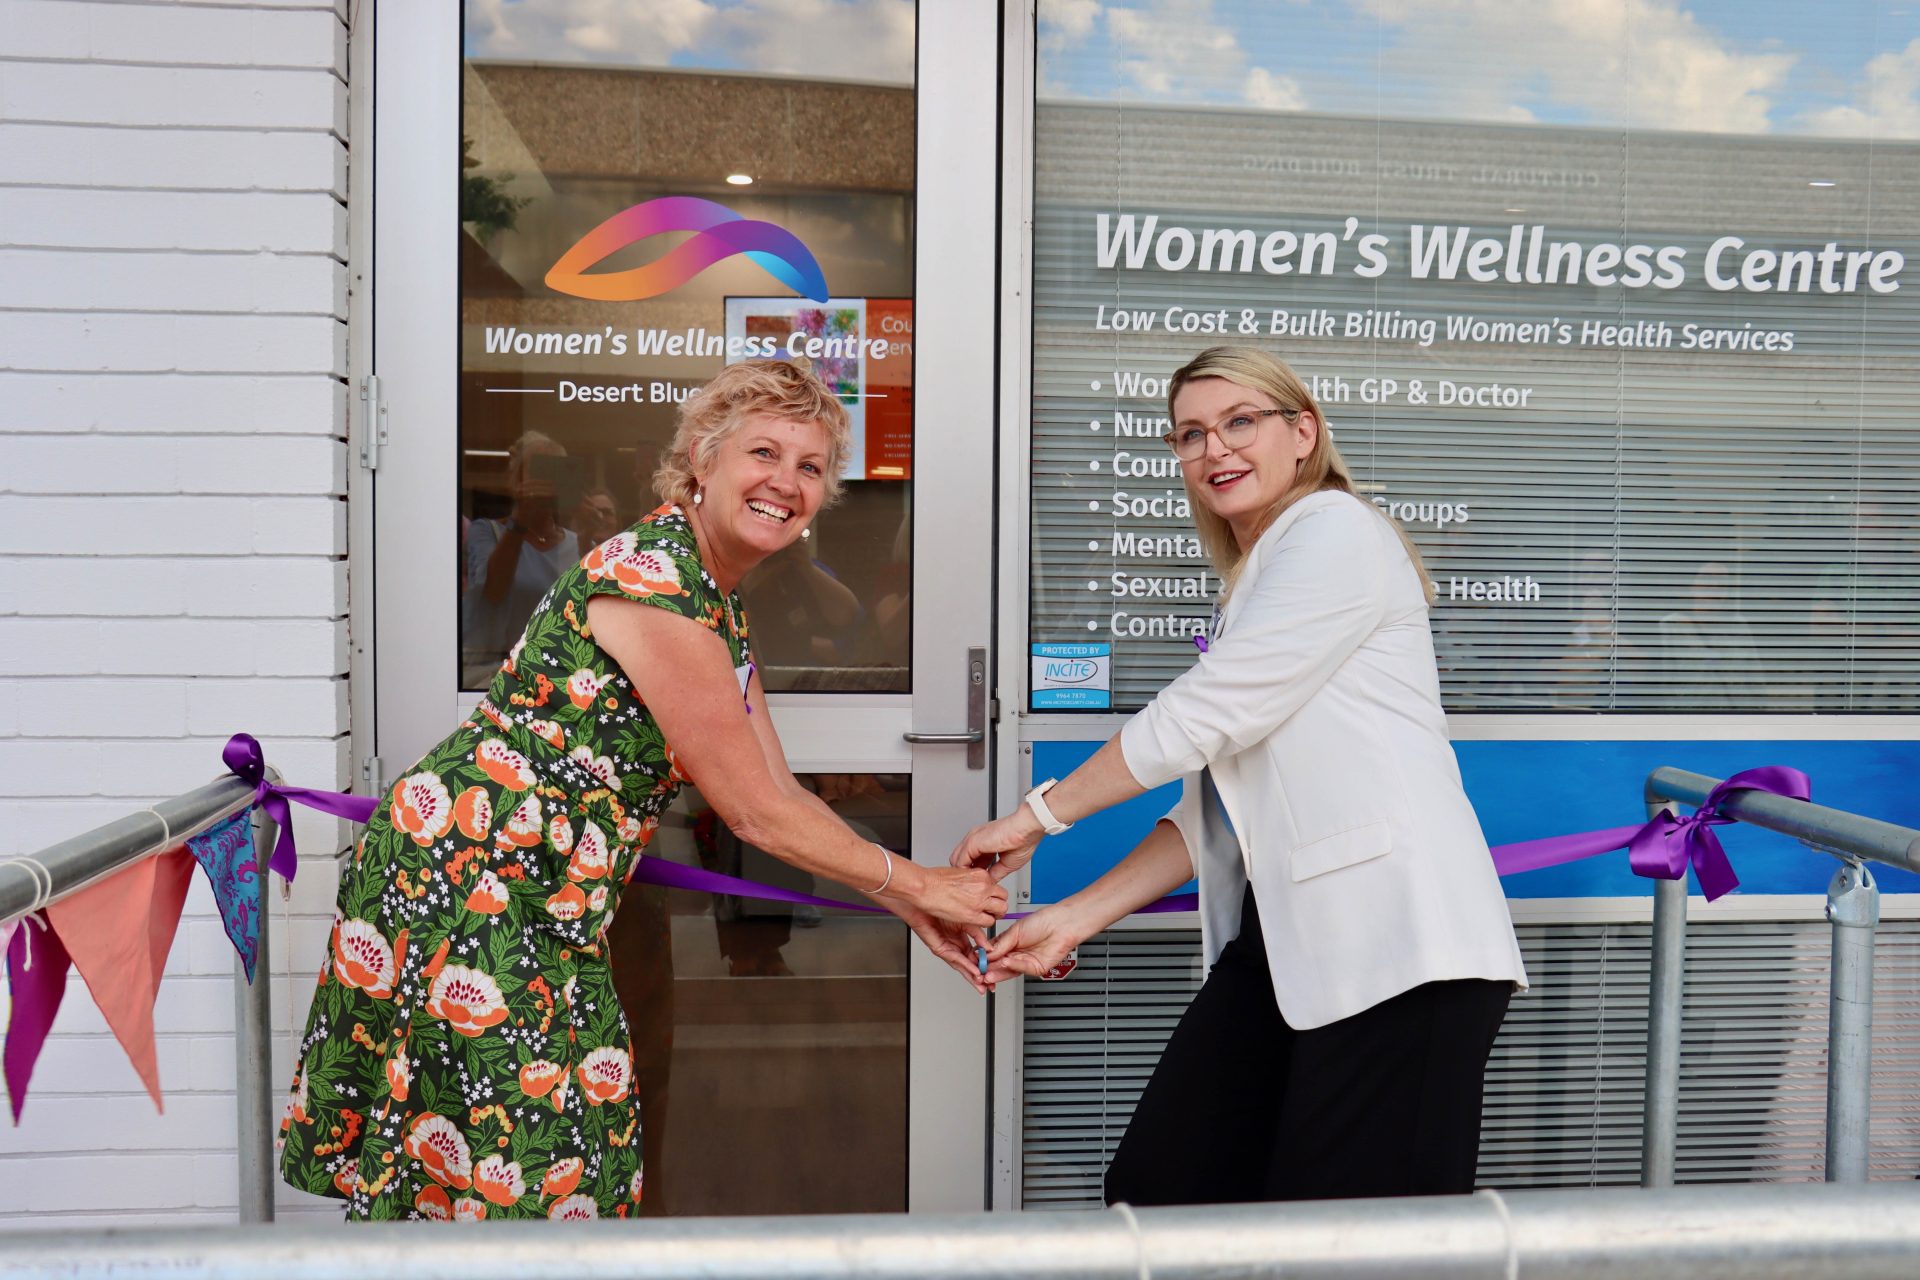 Two women, Lara Dalton and Sandra Carr, cutting a ribbon in front of a women's wellness centre.